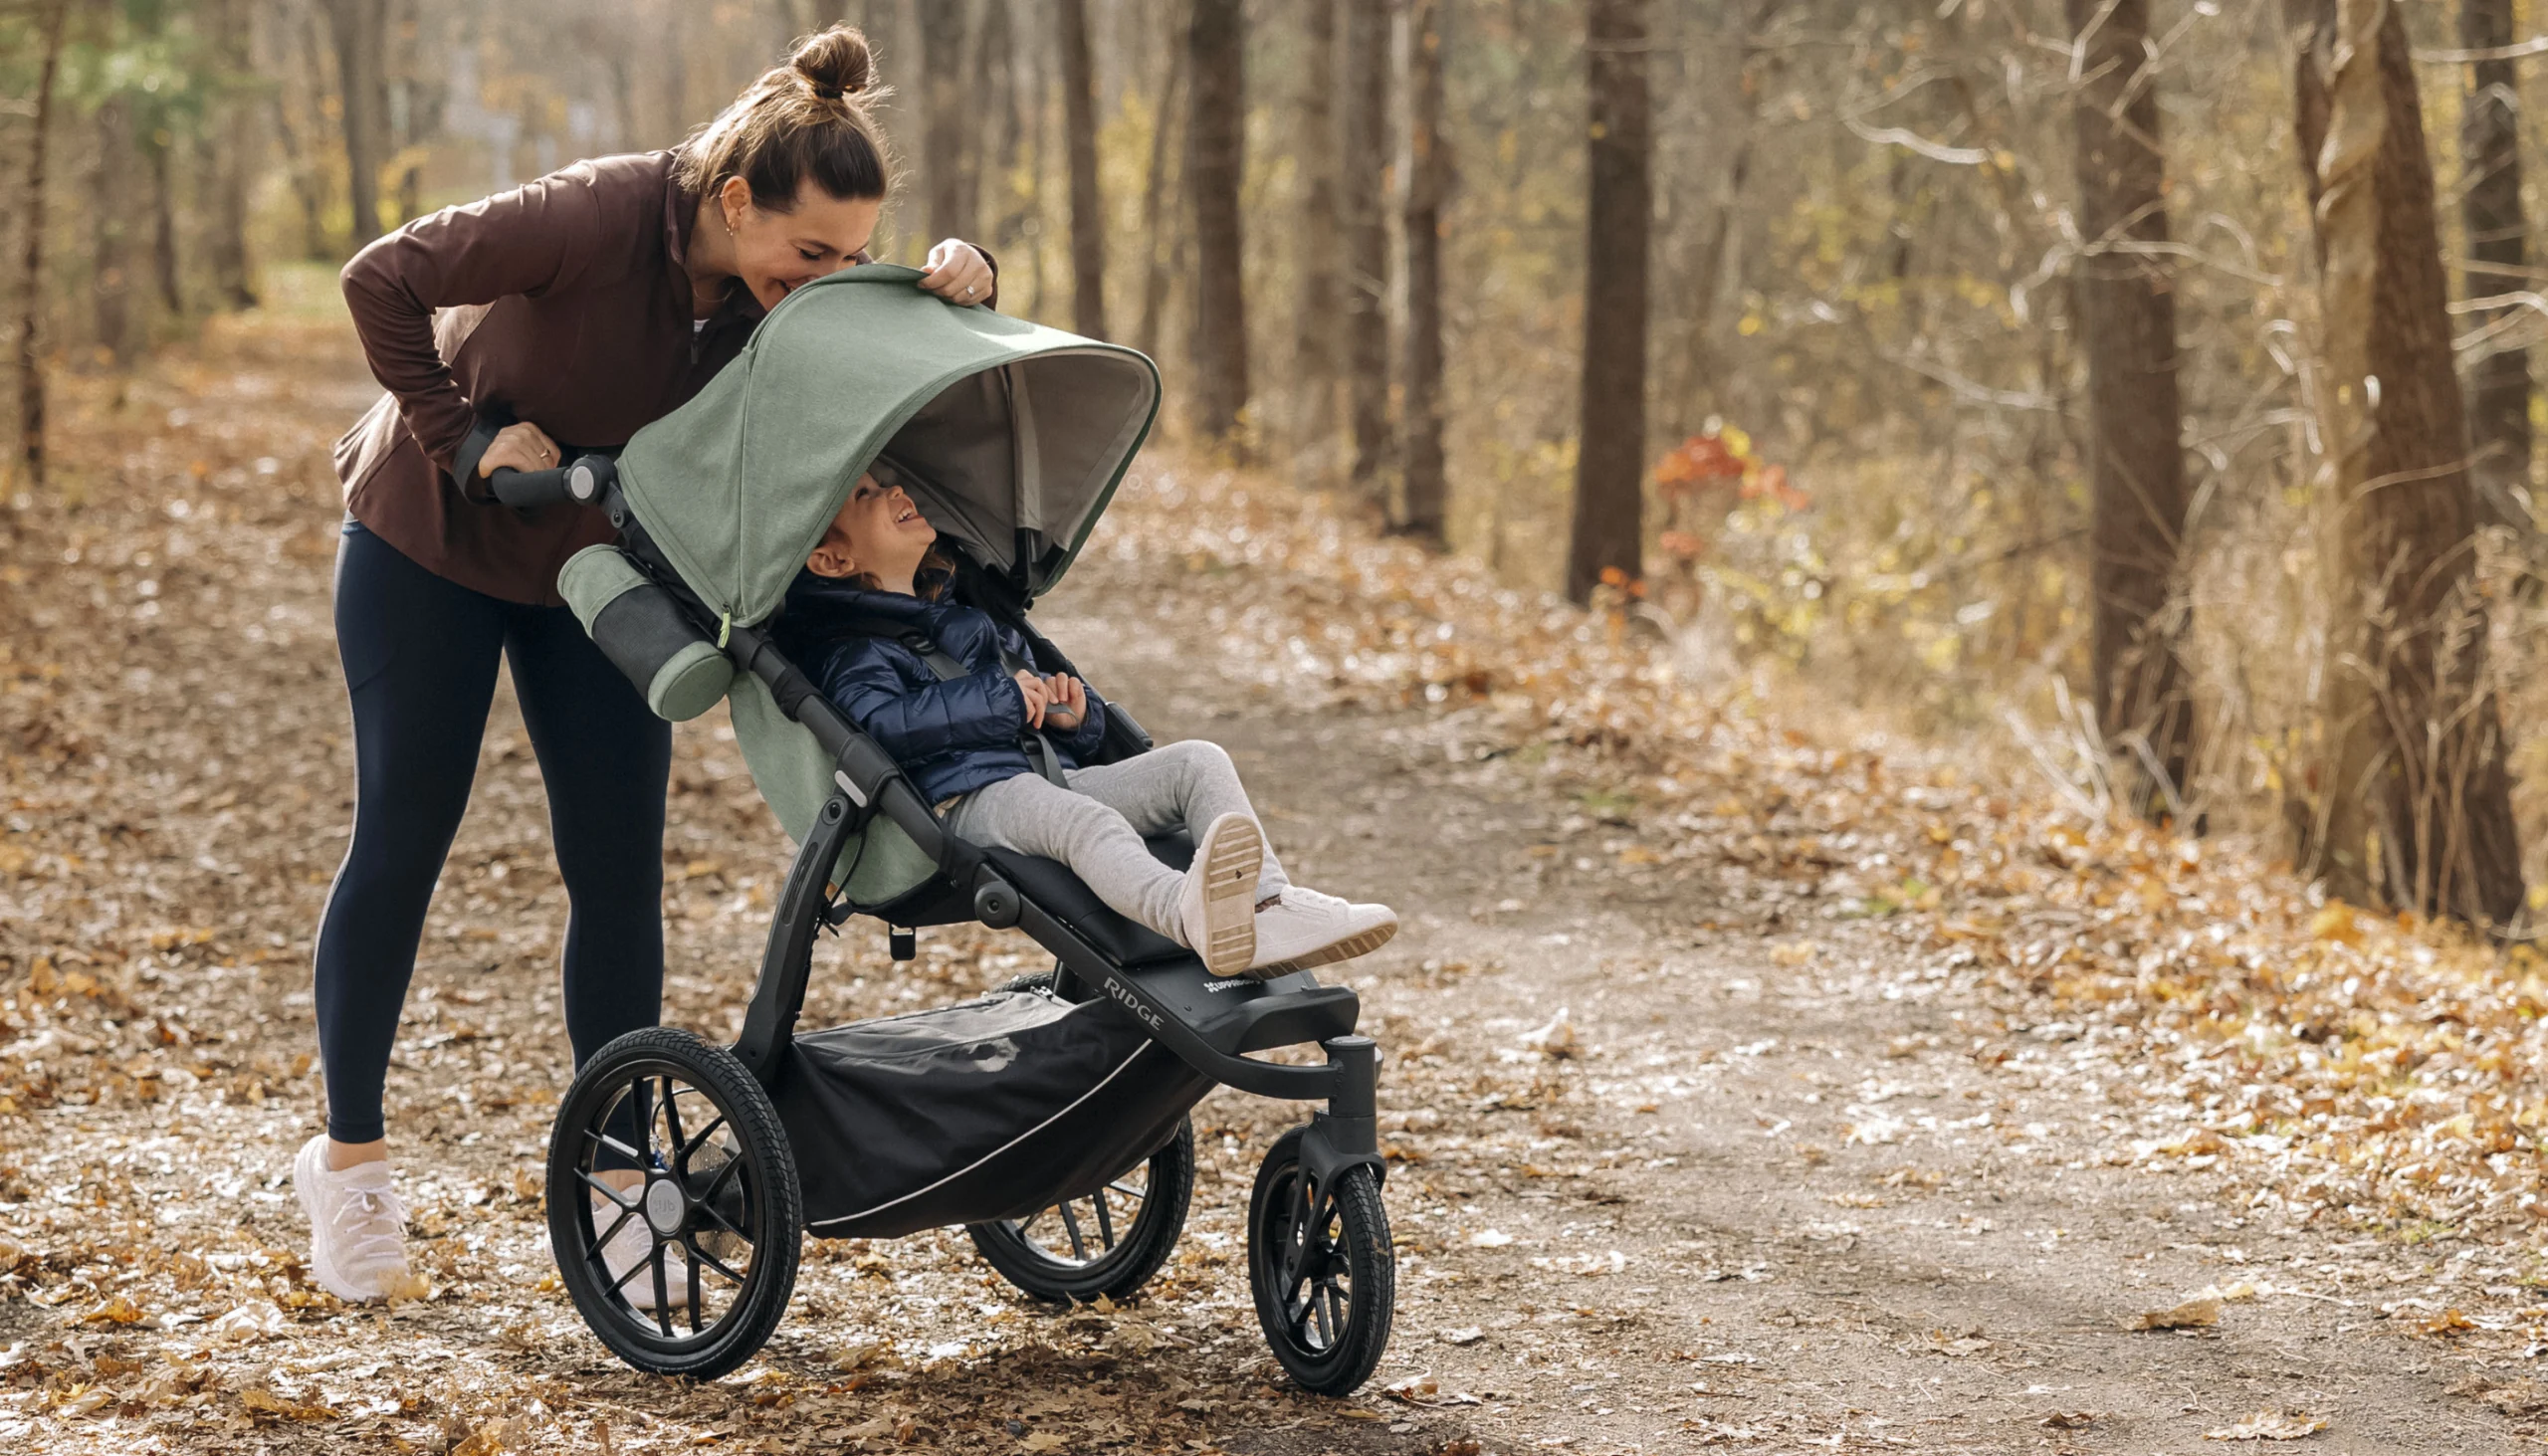 A woman smiles at her child through the Ridge's mesh canopy window while she runs comfortably due to the stroller's advanced suspension two-stage system